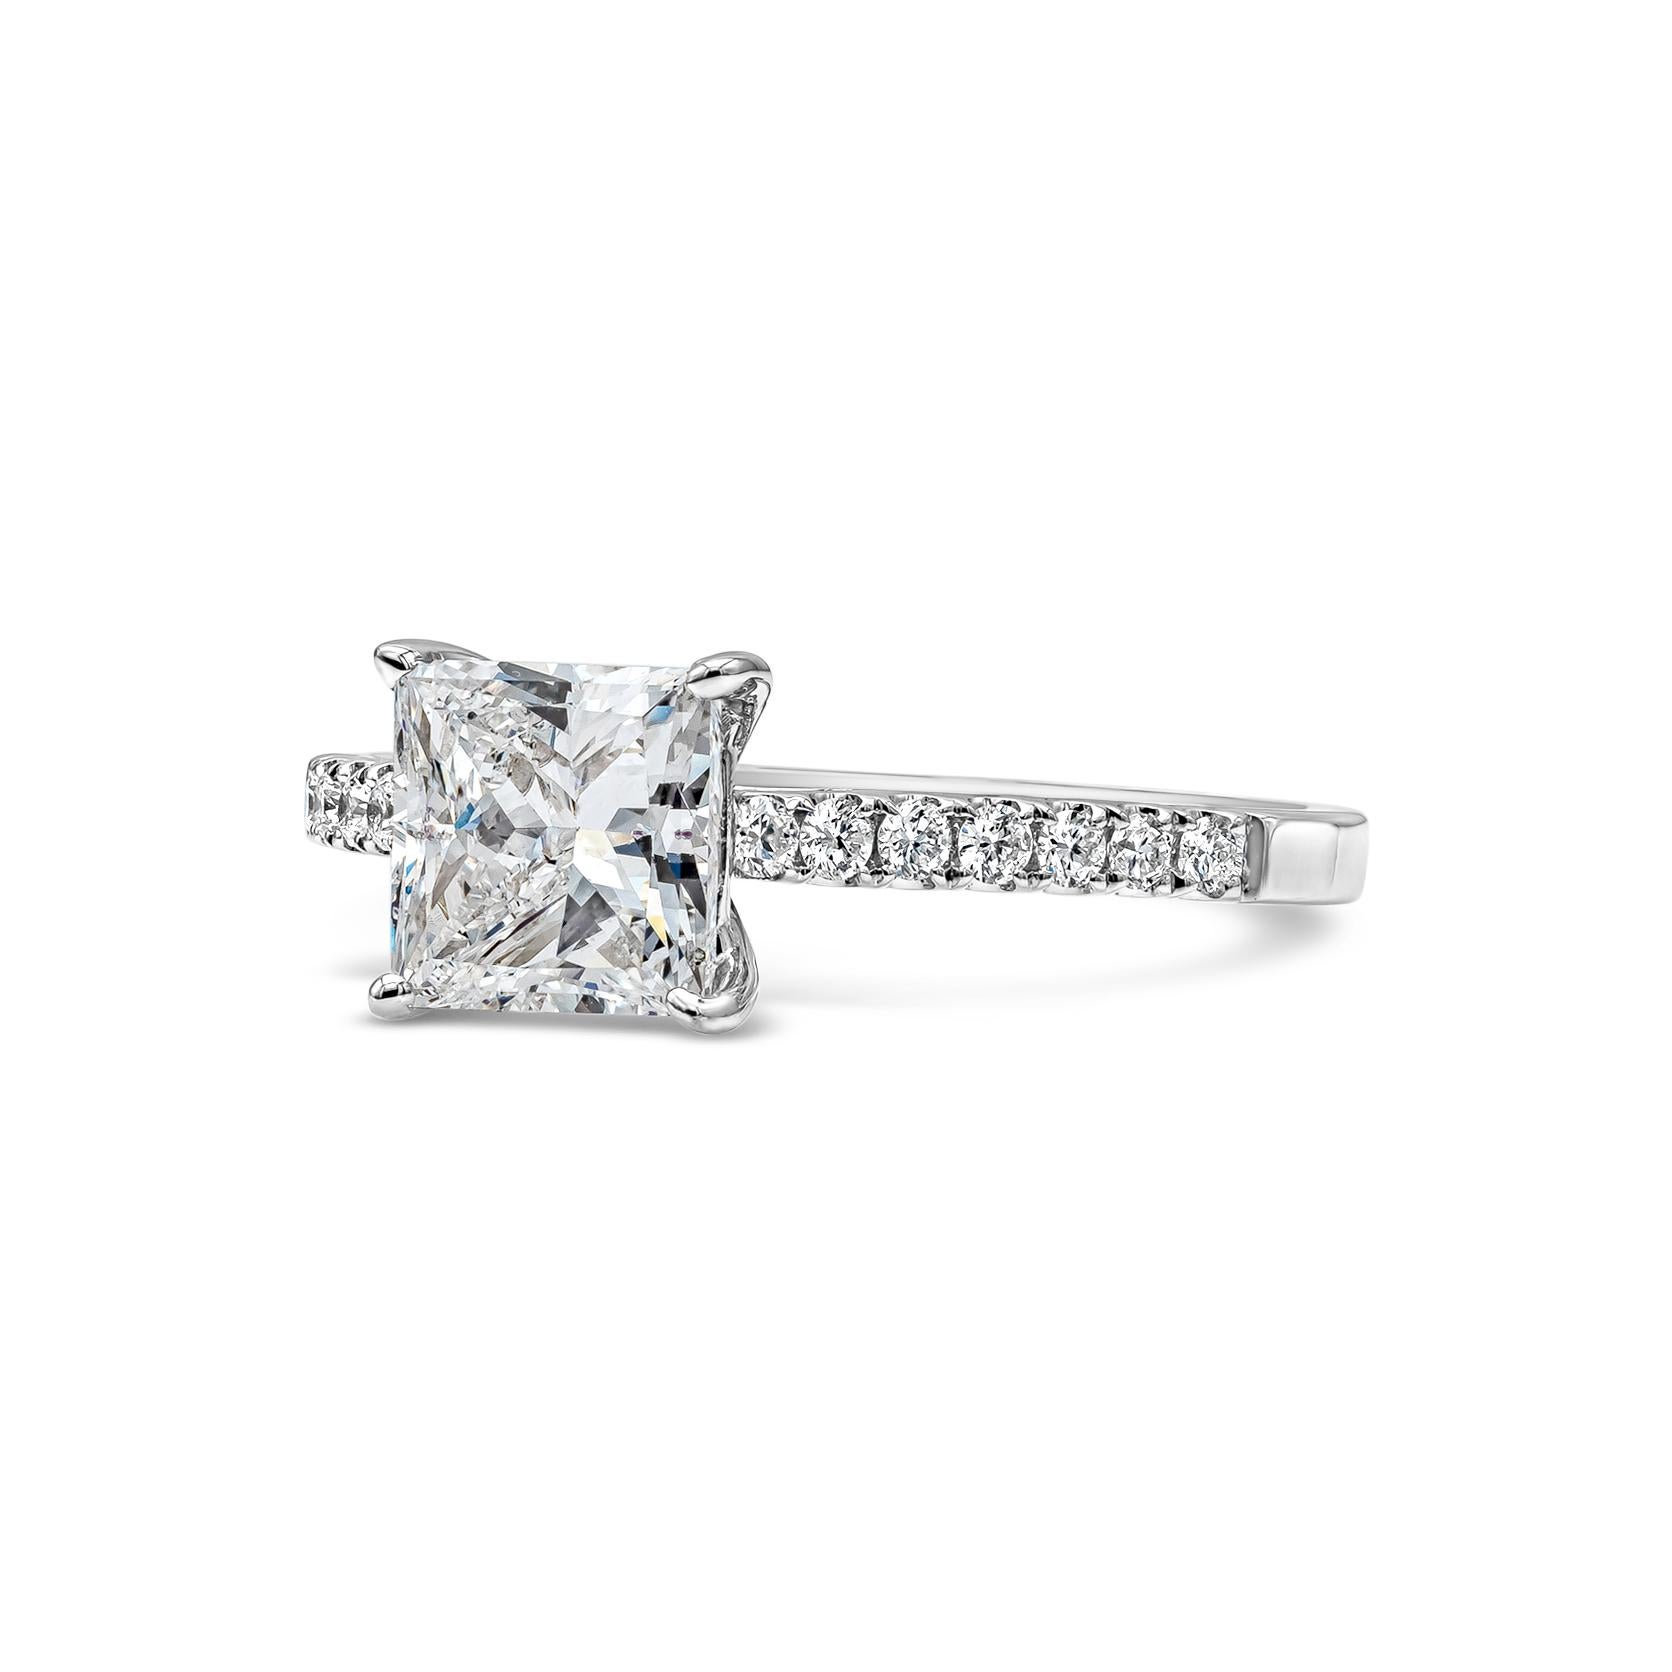 A classic and timeless piece of jewelry showcasing a 1.39 carats princess cut diamond certified by GIA as E color, SI2 in clarity. Beautifully set in a diamond encrusted pave shank made in 18k white gold. Accent diamonds are approximately 0.20